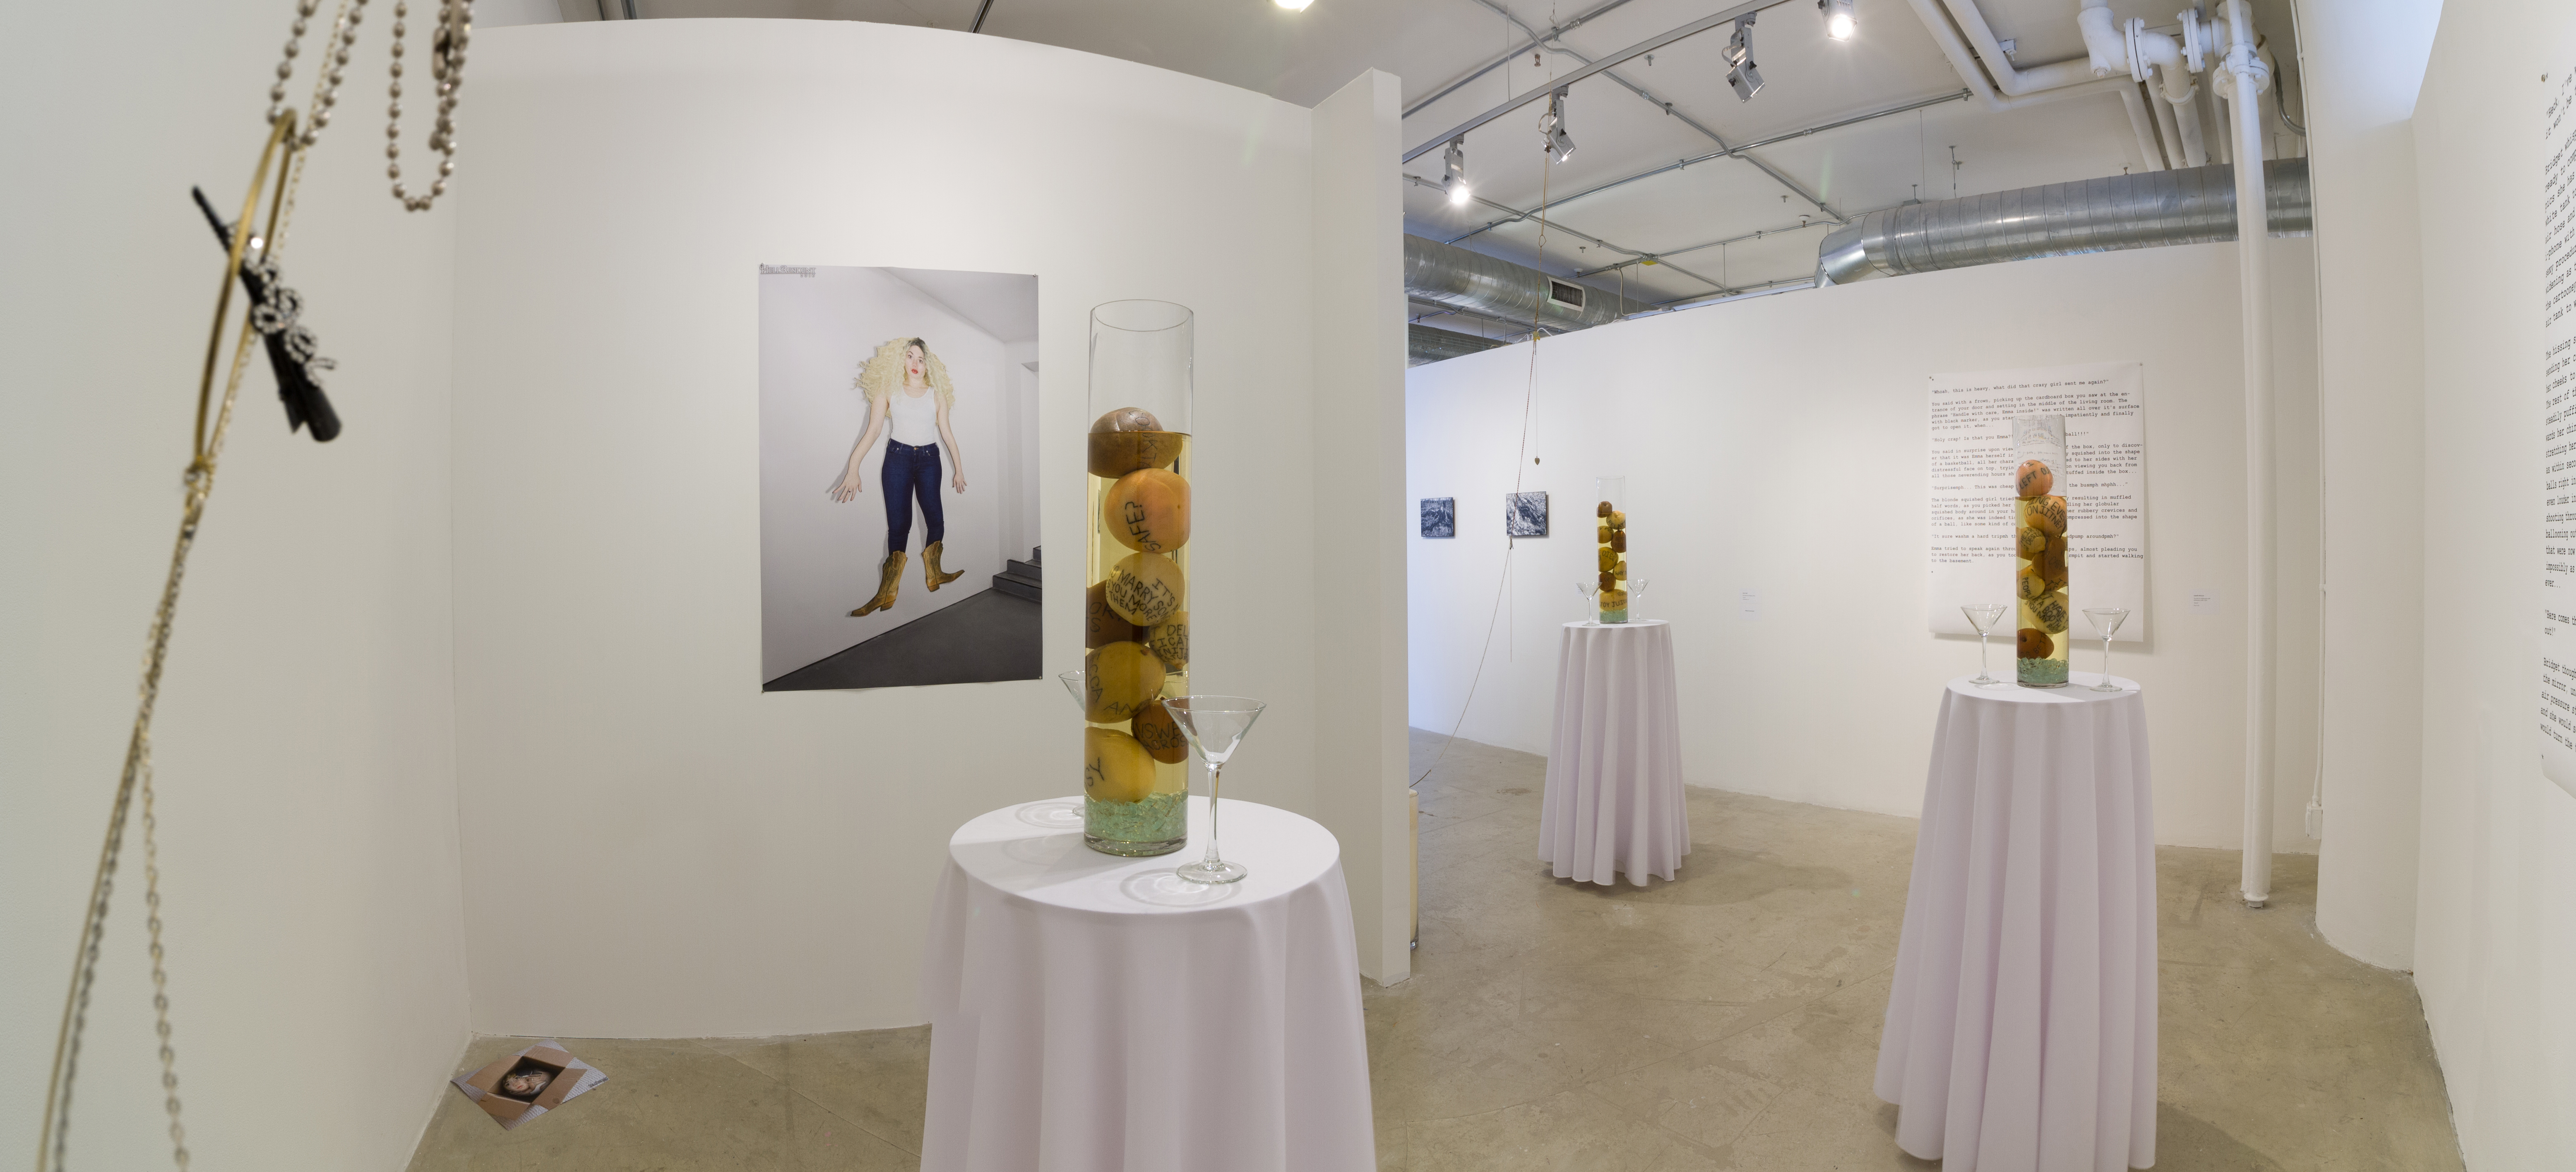 Installation view of three round tables with fruit colums on them and various prints in a white wall gallery